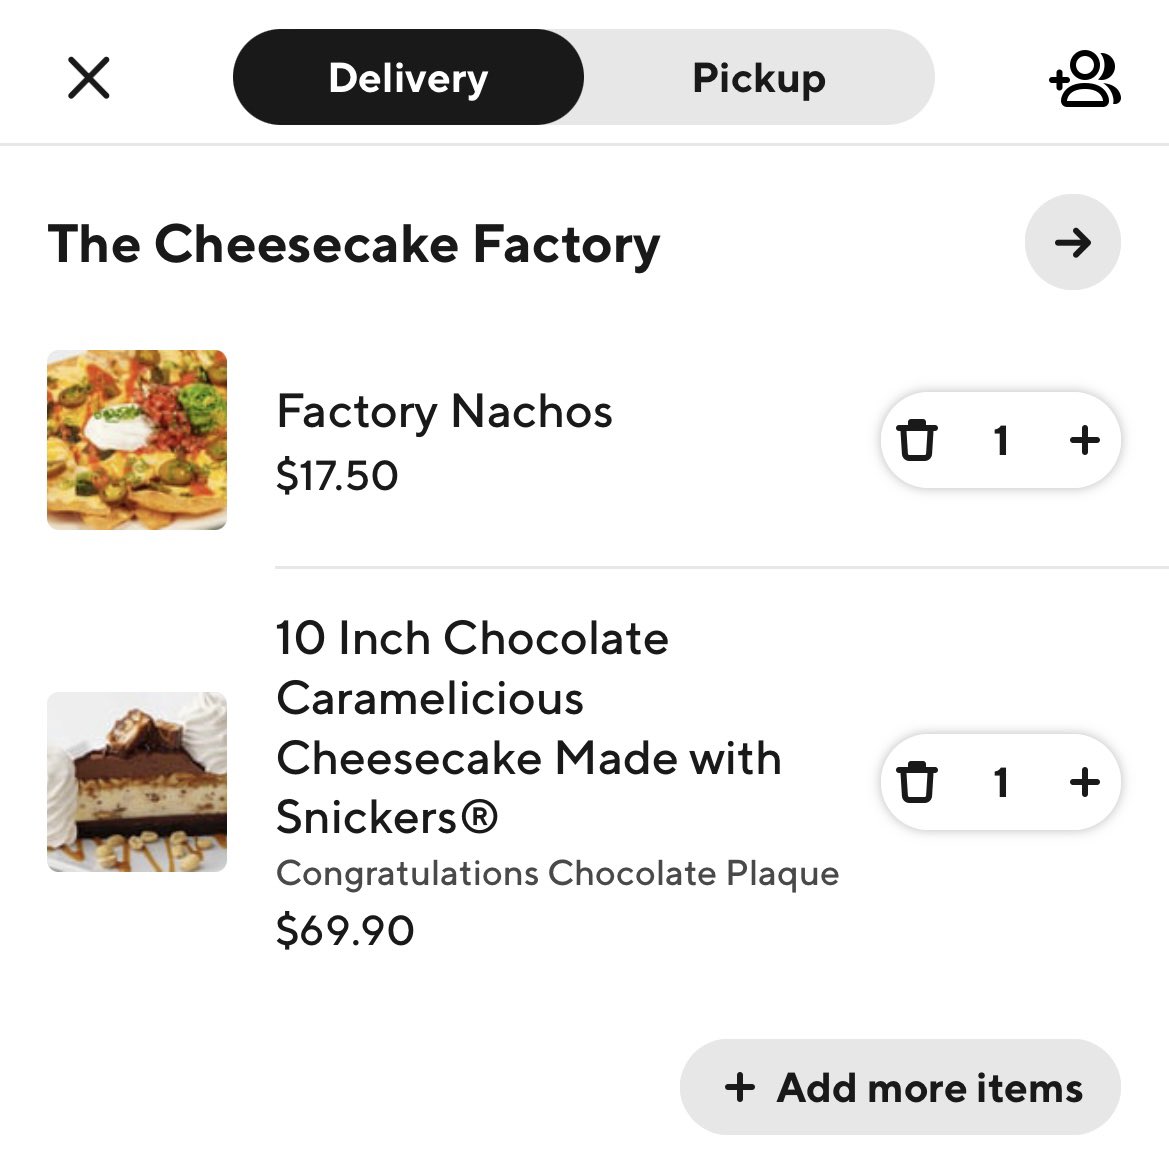 Trying to convince my wife that getting Factory Nachos and a Chocolate Caramelicious Cheesecake delivered at 3:30pm on a Monday is an important display of union solidarity. Noble, selfless, brave.